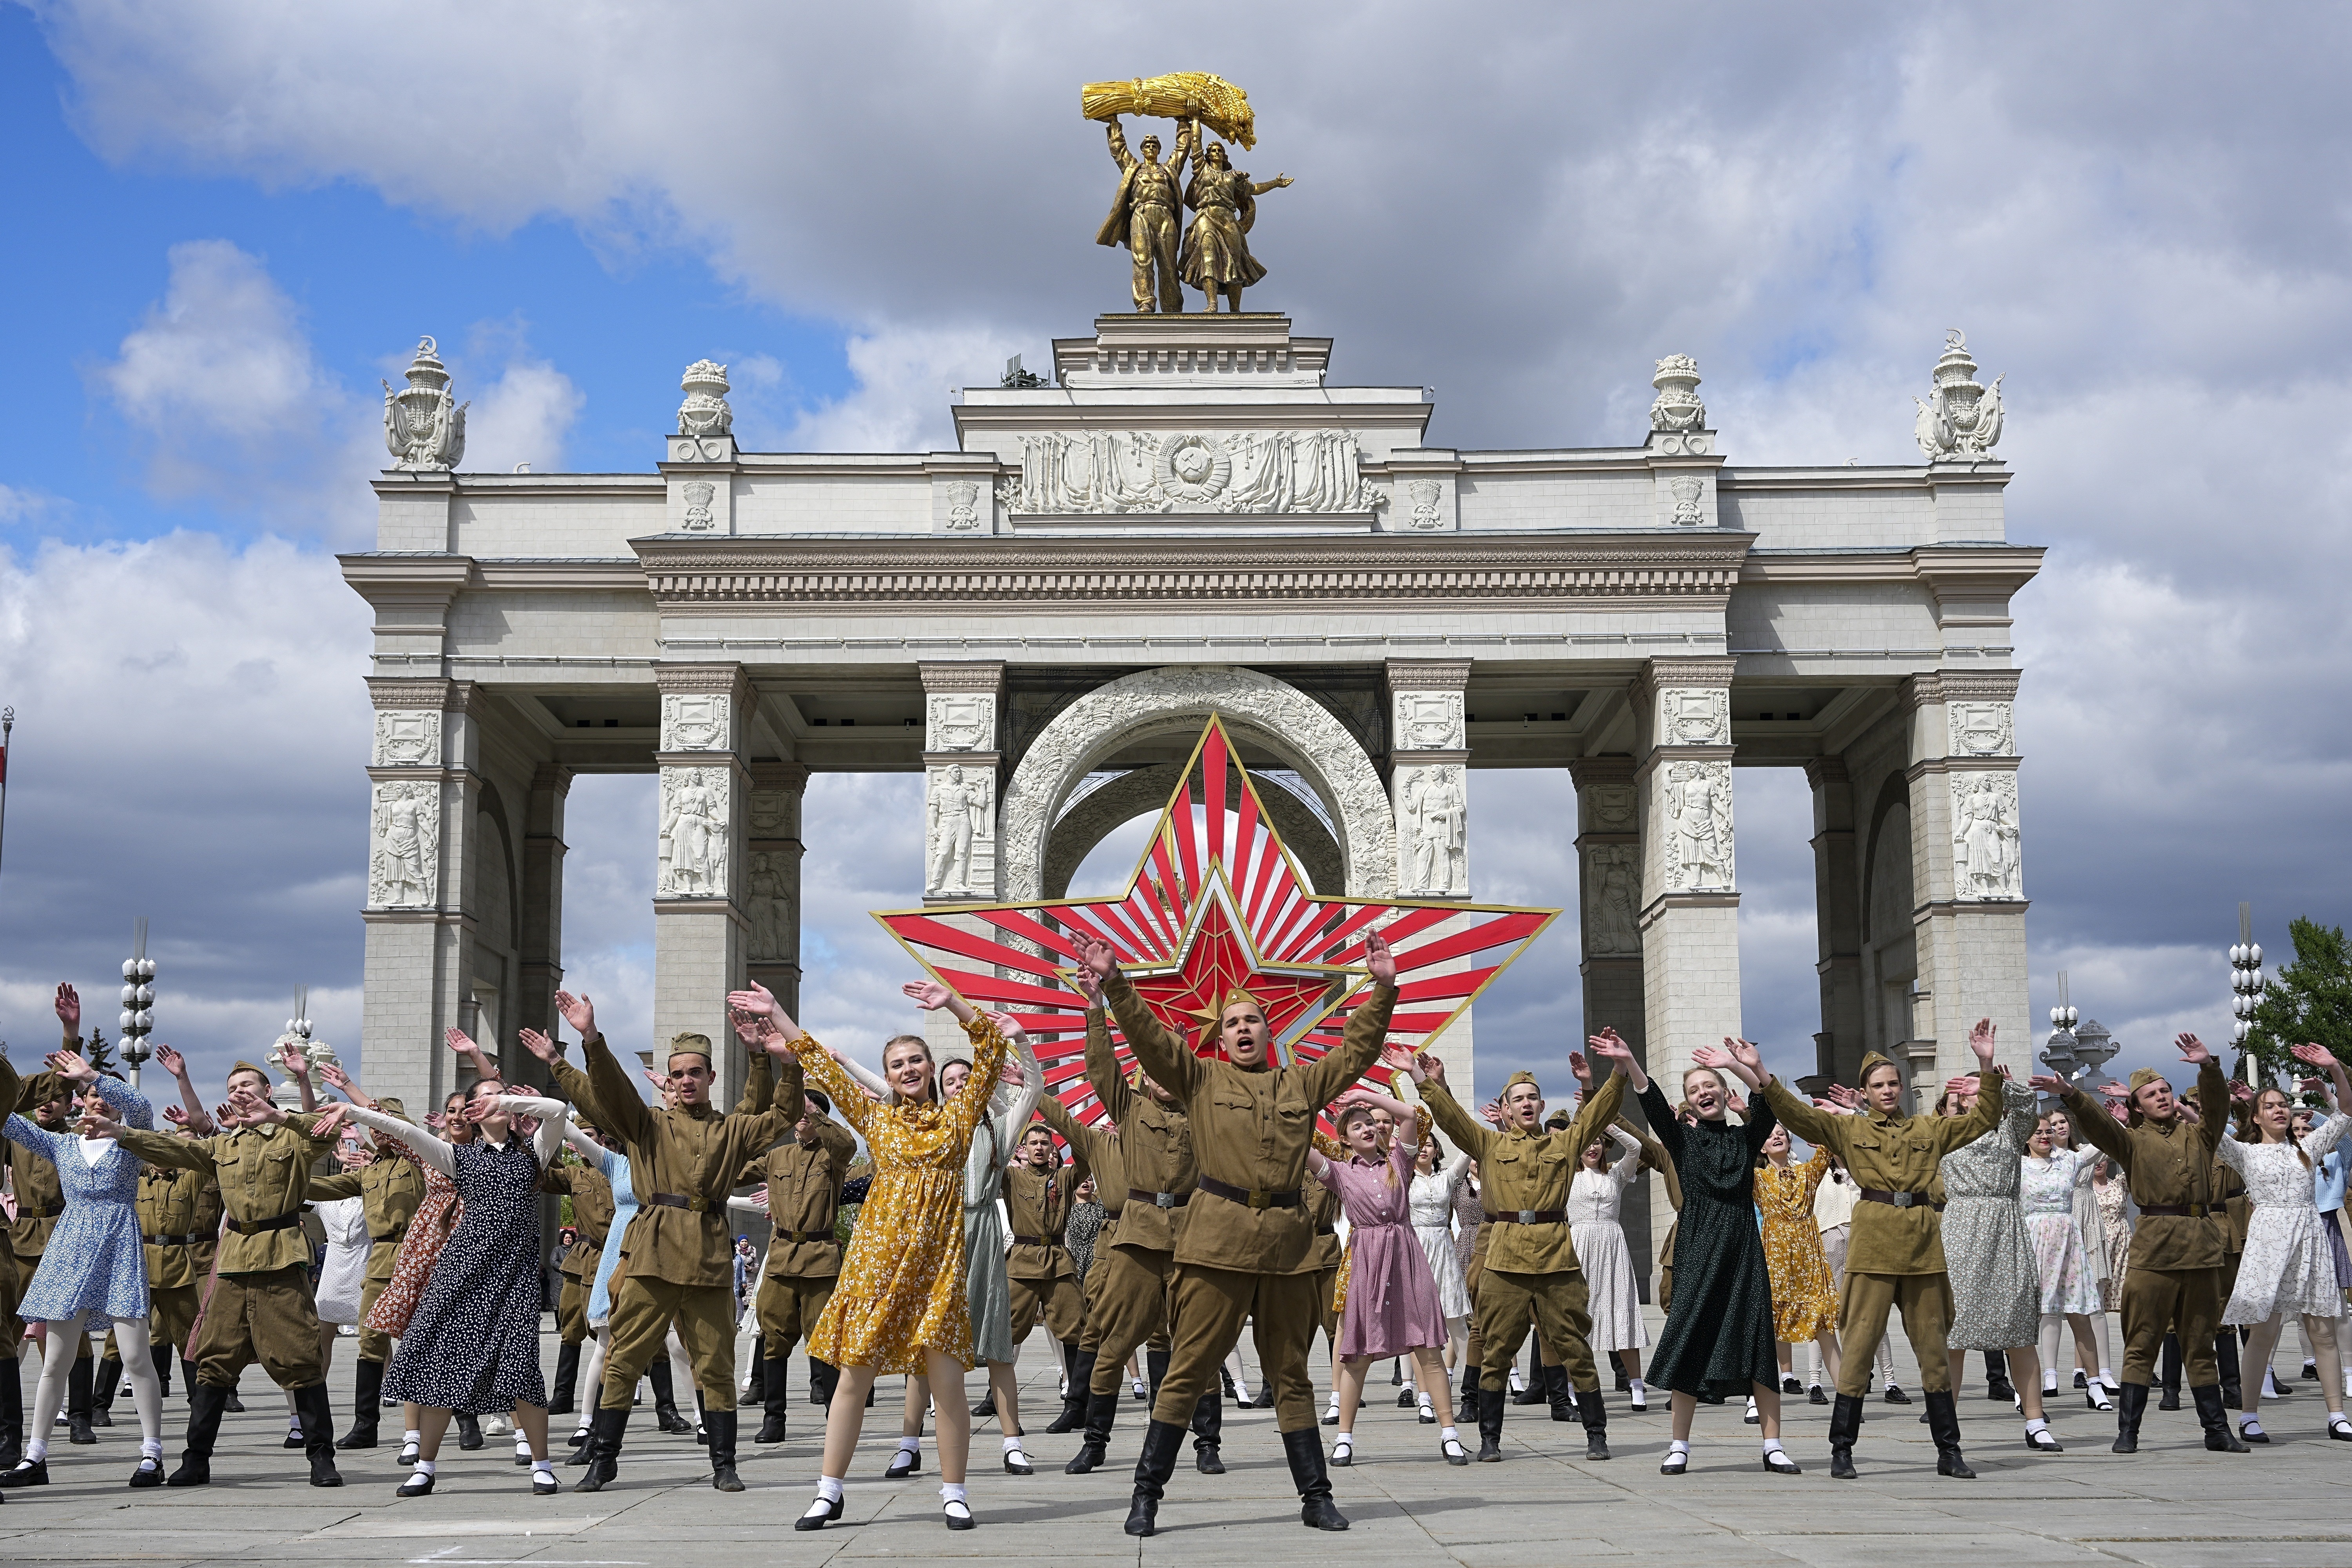 FILE - Moscow students dressed in the fashion of the middle of the last century and Soviet style uniform perform "Victory Waltz" as a part of Victory Day celebration in front of the historical main gates of VDNKh, The Exhibition of Achievements of National Economy, with the red star in the background in Moscow, Russia, Saturday, May 6, 2023. In Russia, history has long become a propaganda tool used to advance the Kremlin's political goals. In an effort to rally people around the flag, the authorities have sought to magnify the country's past victories while glossing over the more sordid chapters of its history. (AP Photo, File)